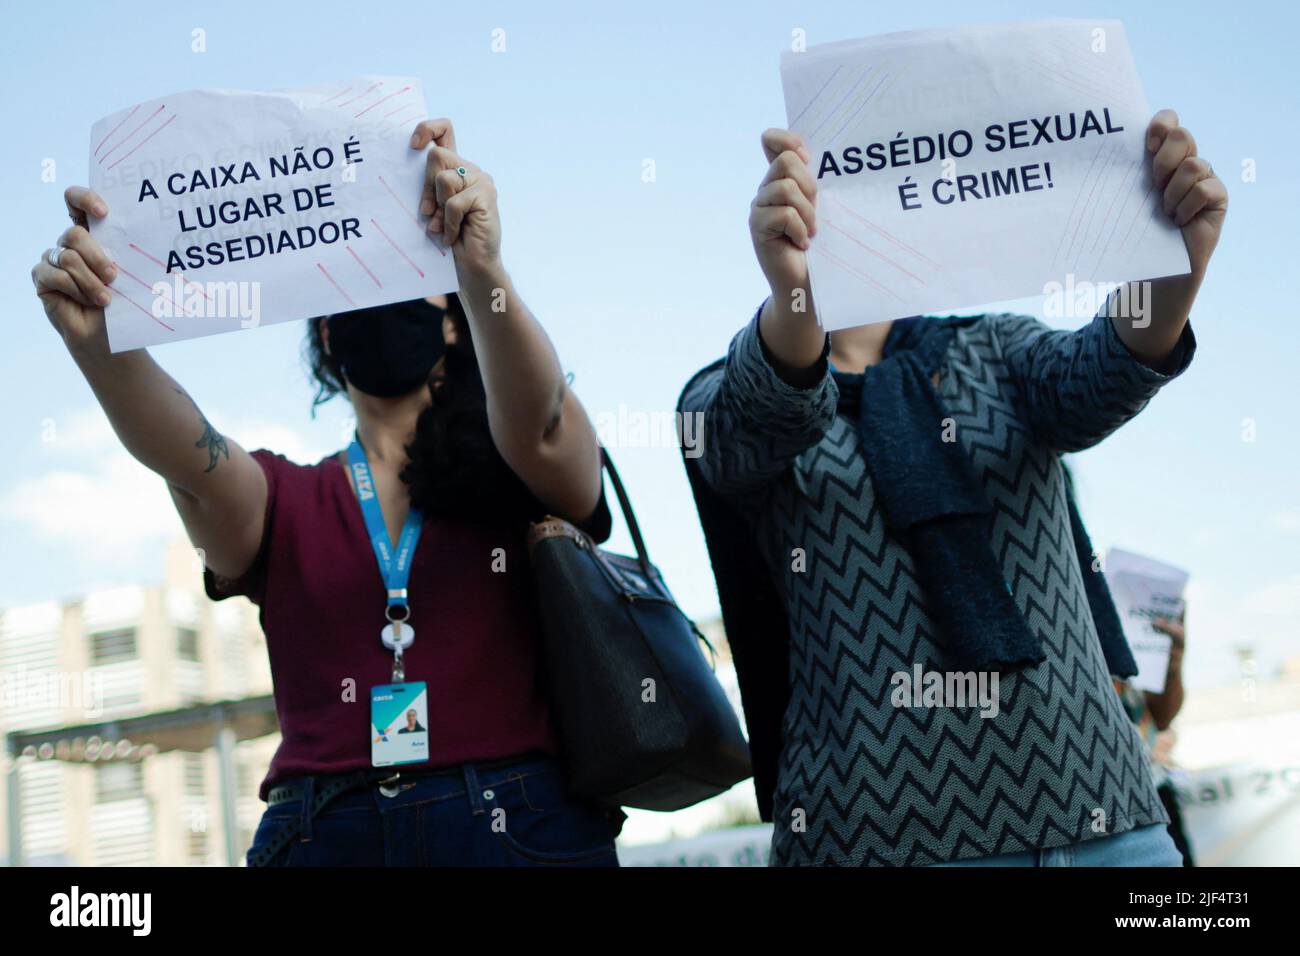 Employees of Caixa Economica Federal bank take part in a protest against the bank's president Pedro Guimaraes after allegations of sexual harassment, outside the bank's headquarters in Brasilia, Brazil June 29, 2022. REUTERS/Ueslei Marcelino Stock Photo